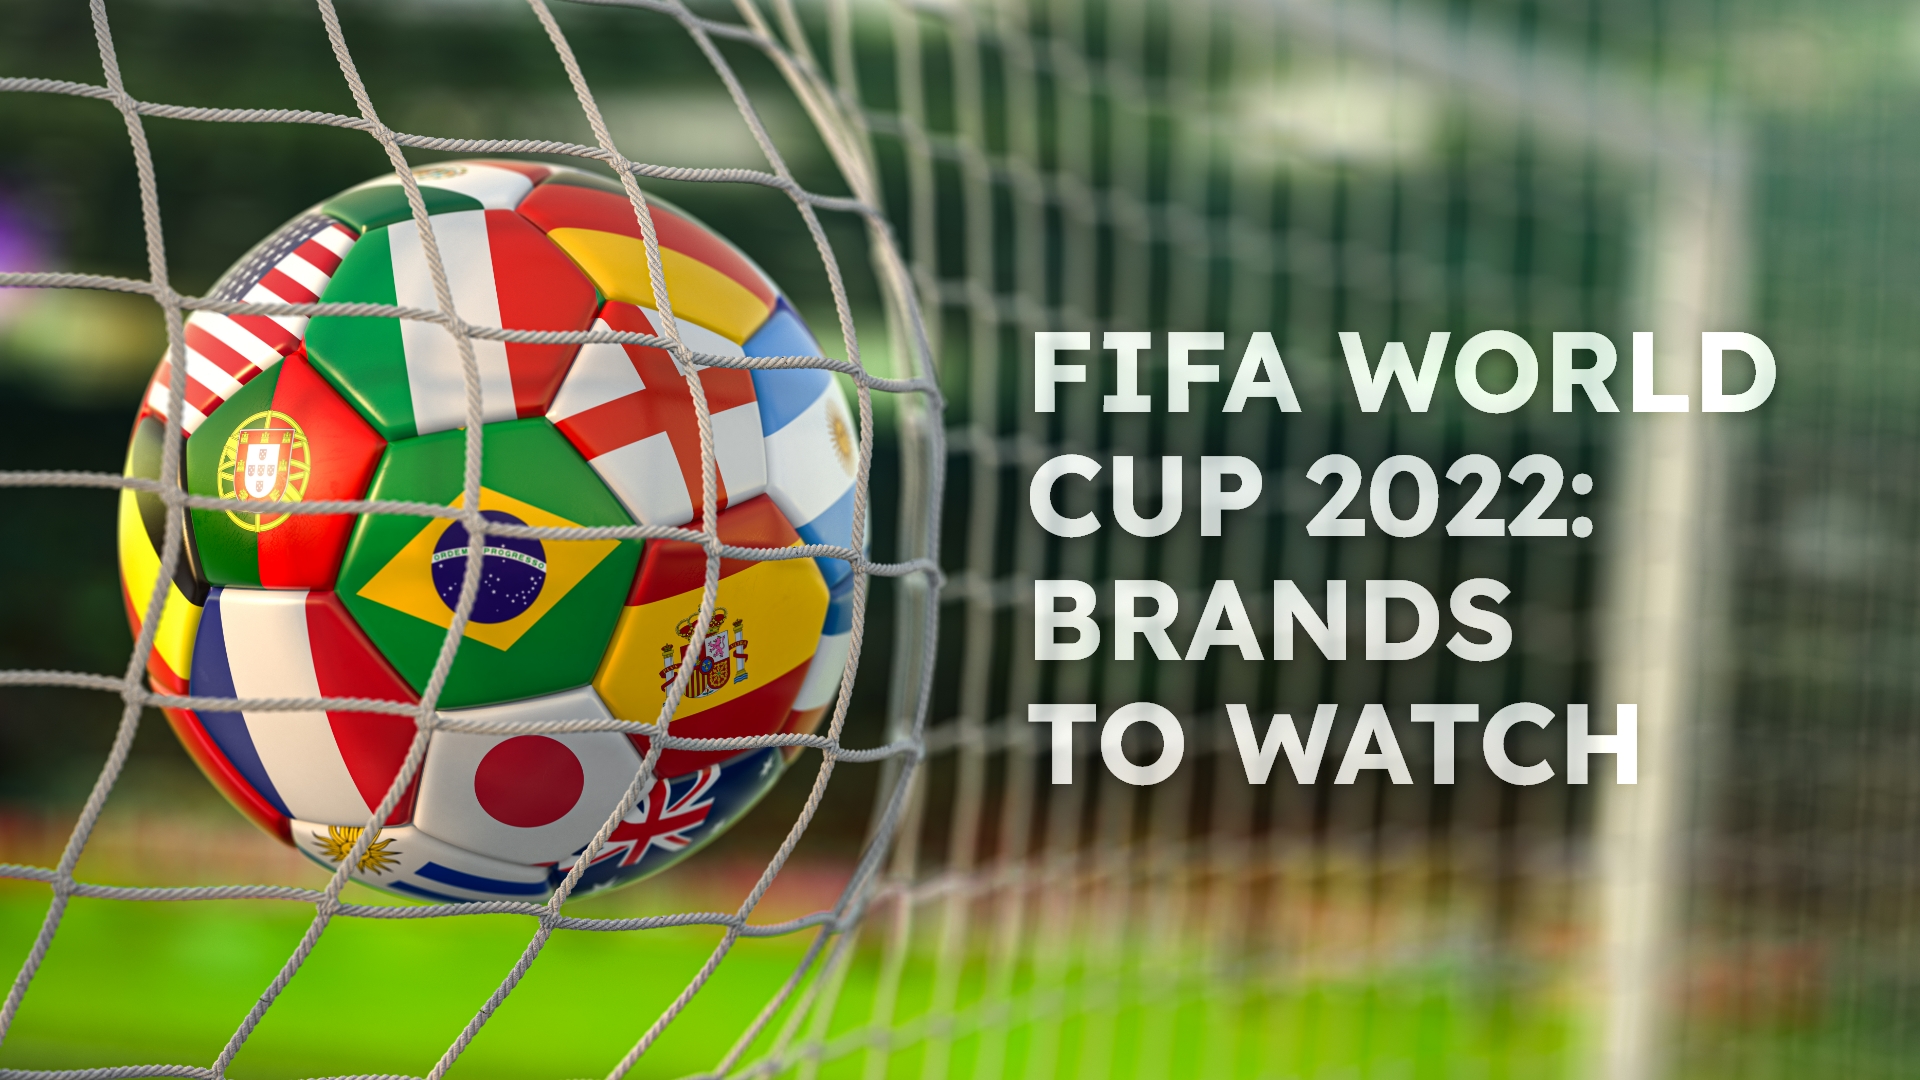 BYJU'S becomes an Official Sponsor of FIFA World Cup Qatar 2022